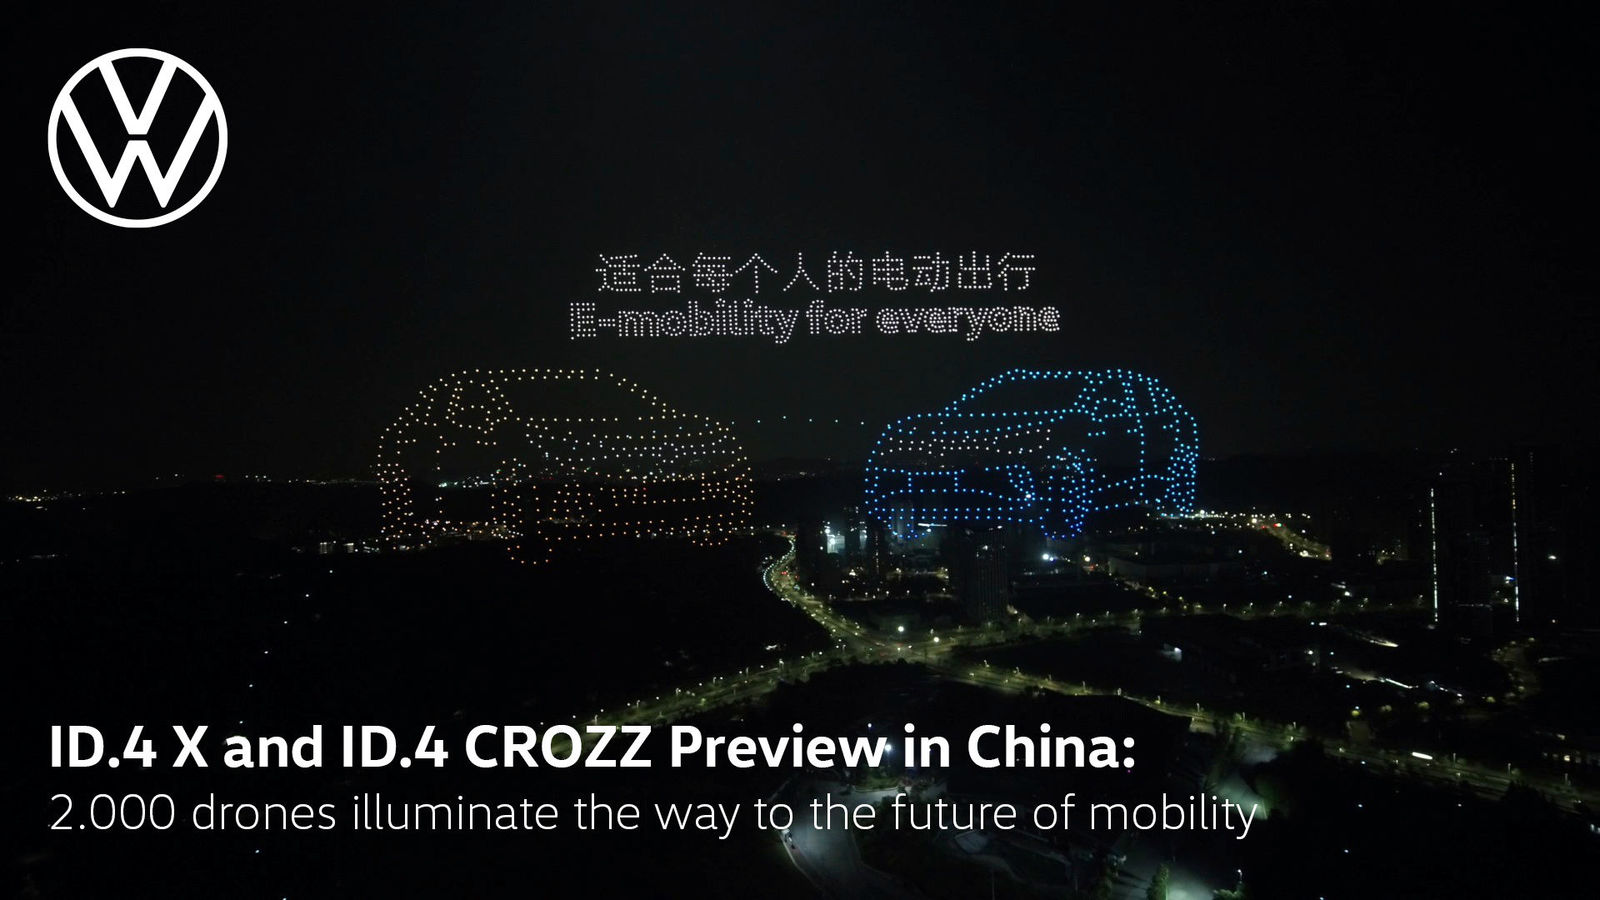 ID.4 X und ID.4 CROZZ Preview in China